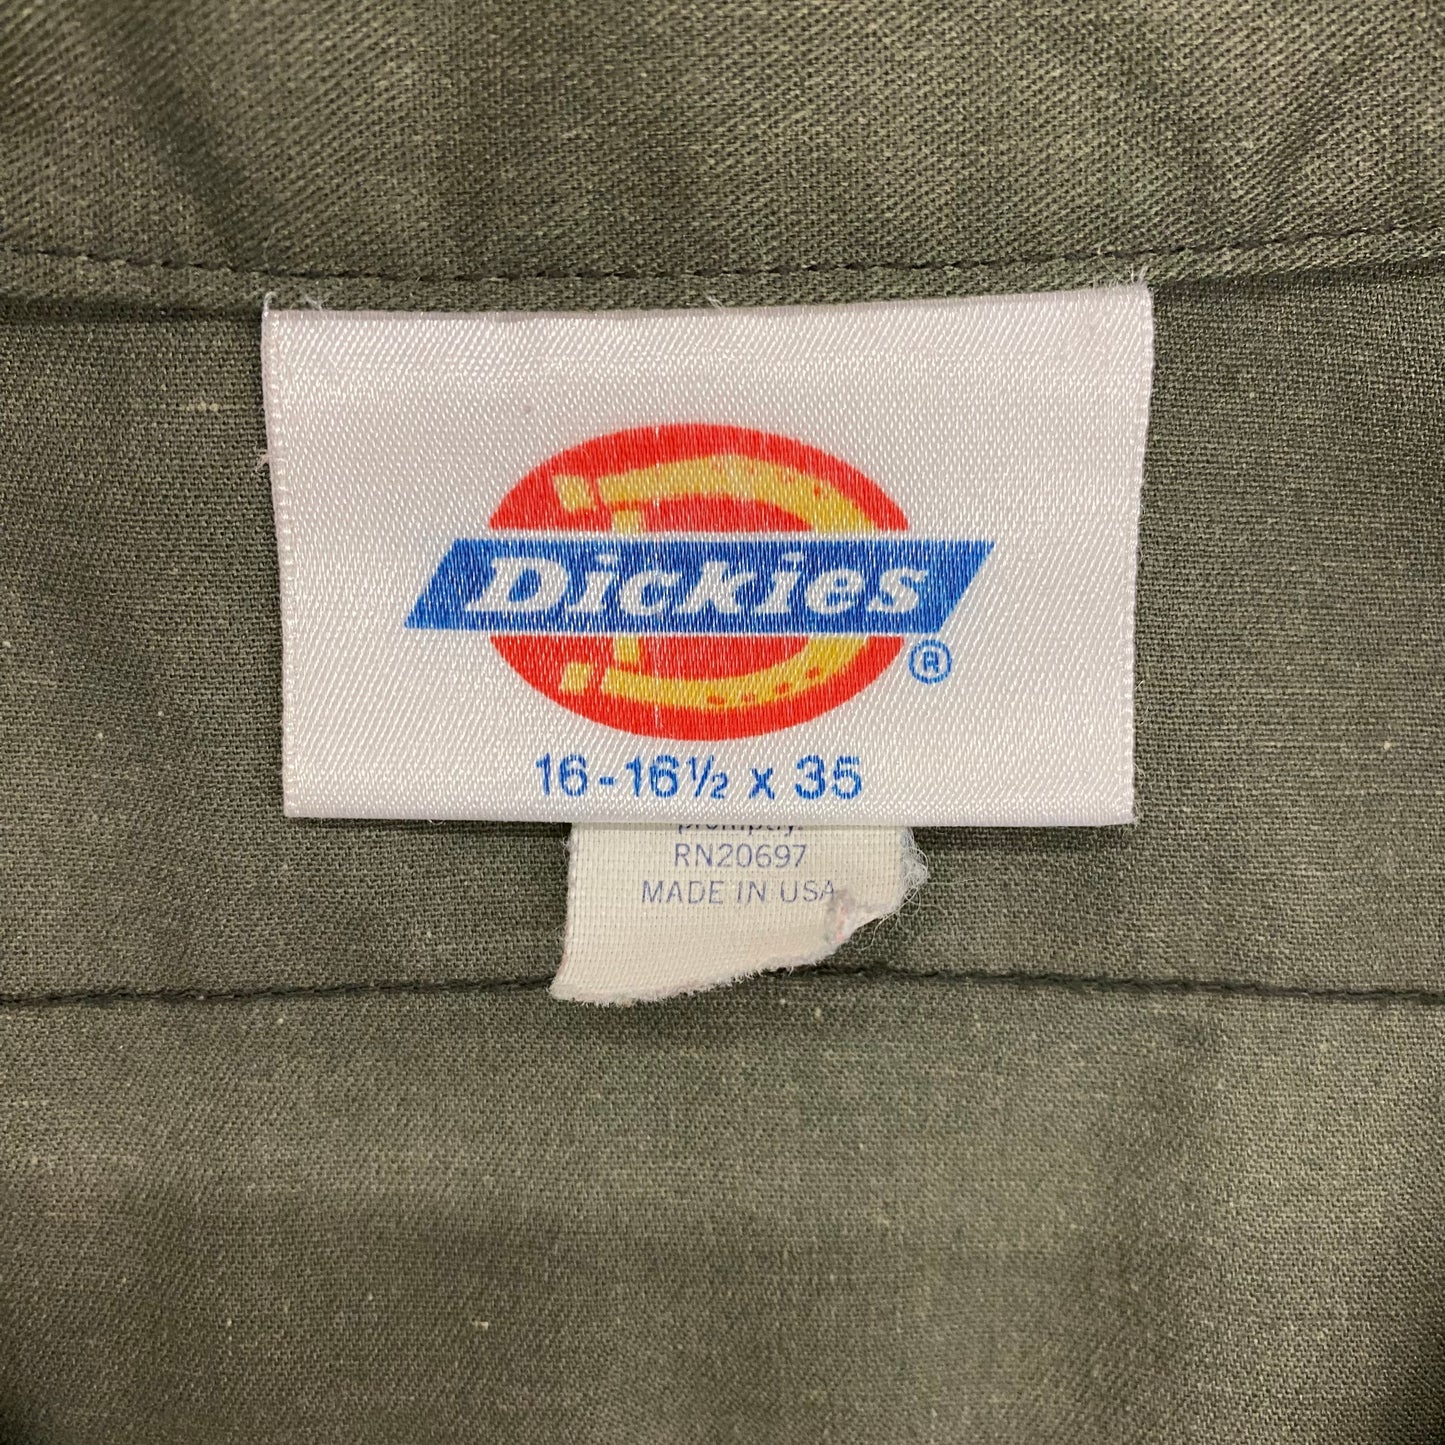 Dickies Made in the USA Olive Green Button Up Work Shirt - Size Large